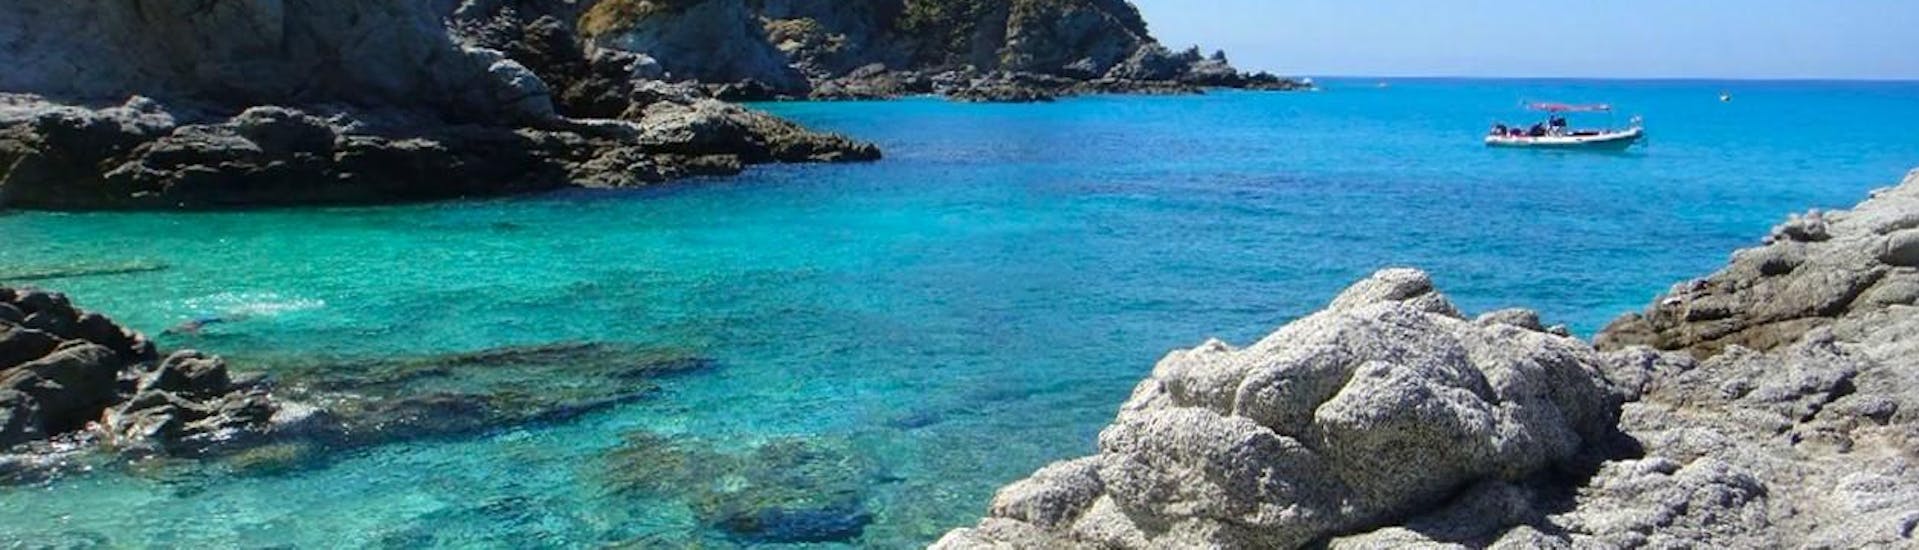 The emerald waters of Calabria that you can admire during the RIB Boat Trip from Tropea along the Coast of the Gods.